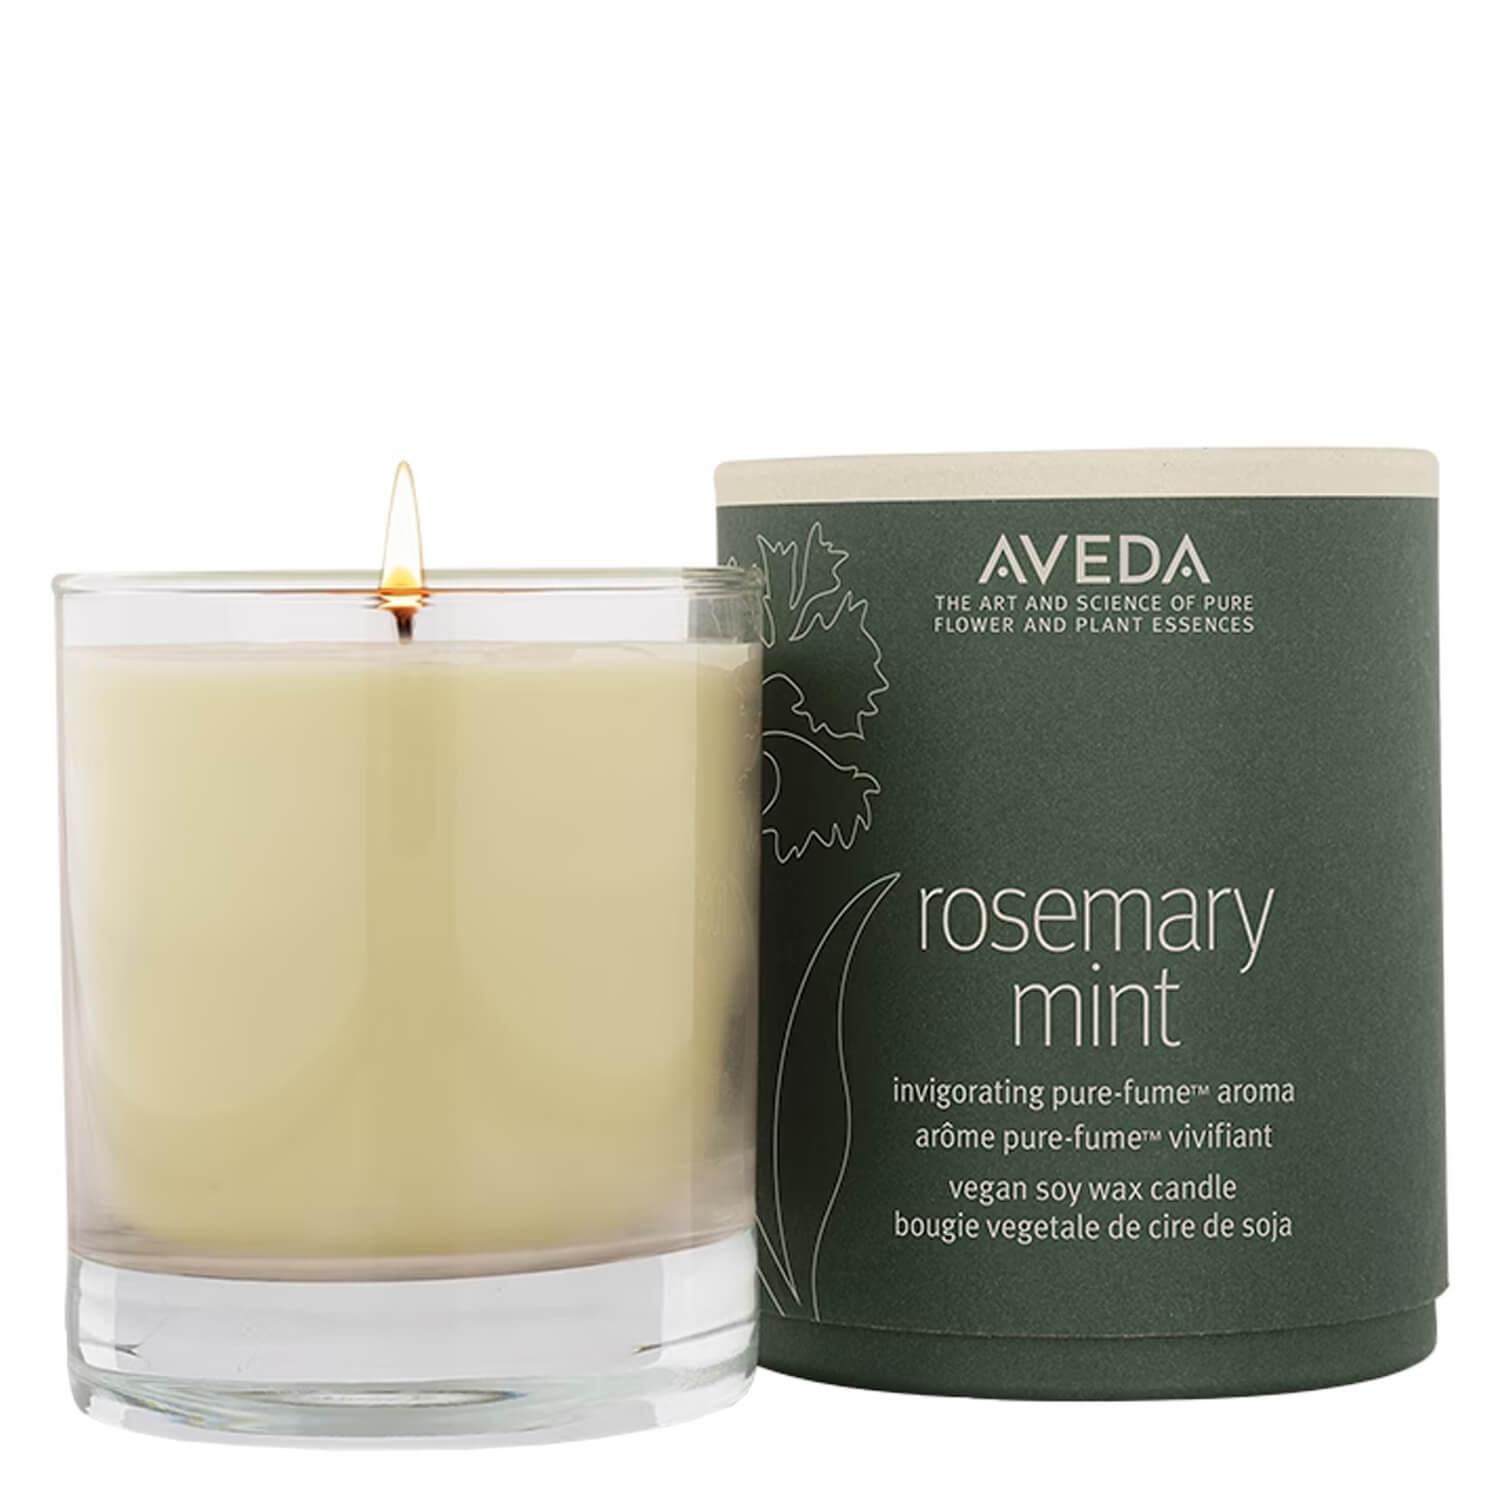 rosemary mint - Vegan Soy Wax Candle